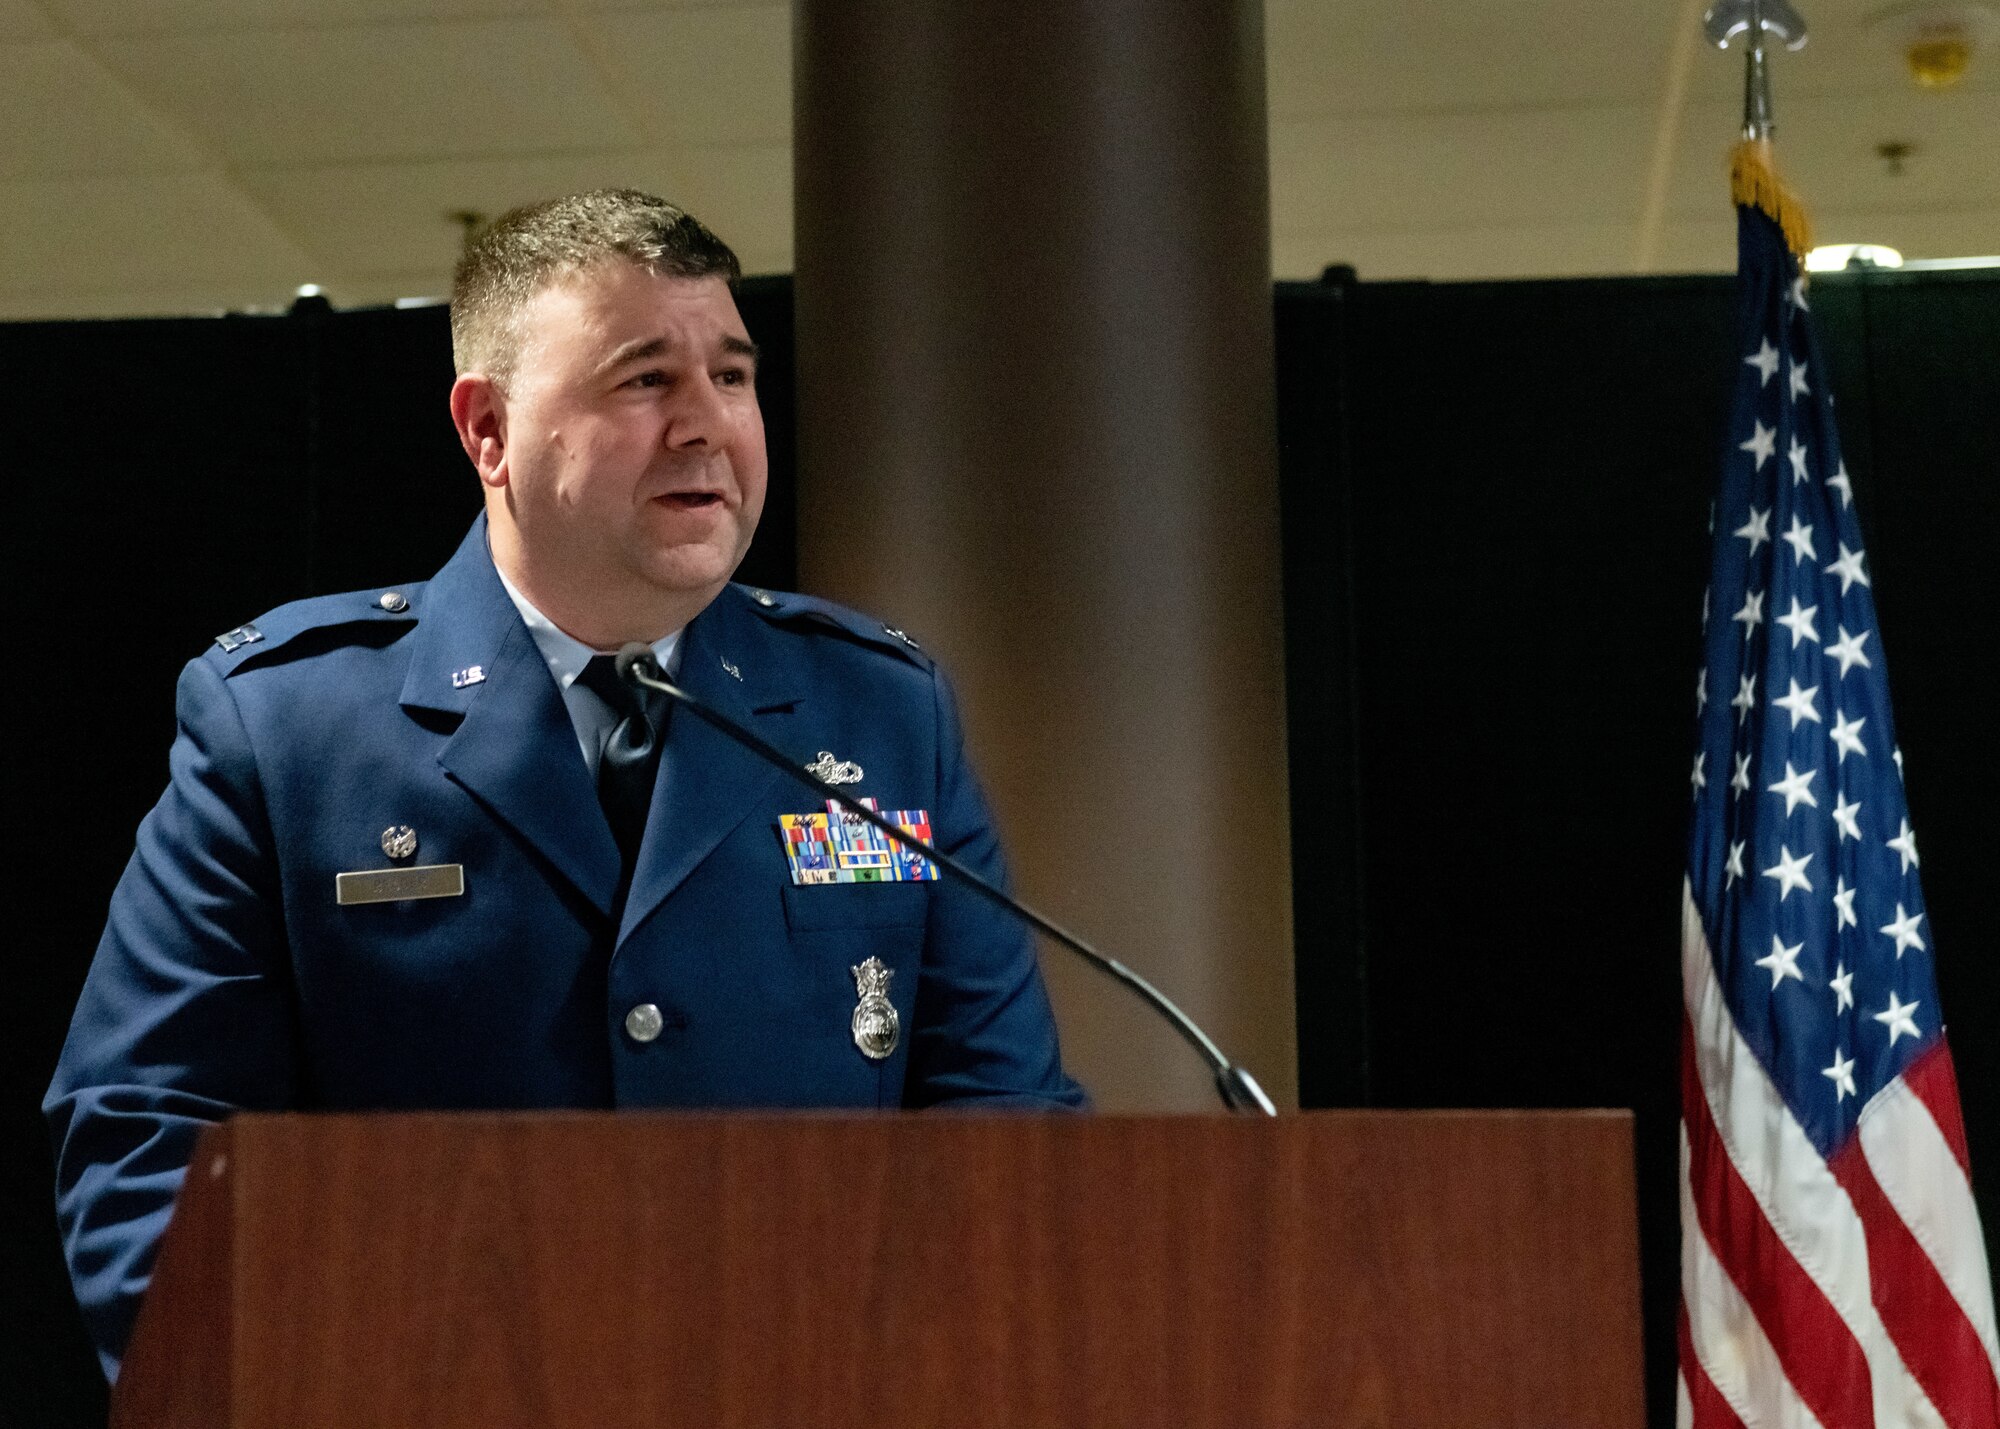 Capt. Robert Reader, the commander of the 910th Security Forces Squadron, speaks to his Airmen and leadership, Feb. 4, 2023, at the unit’s change of command ceremony at Youngstown Air Reserve Station, Ohio. During the ceremony, Maj. Nicholas Megyesi transferred command to Reader.